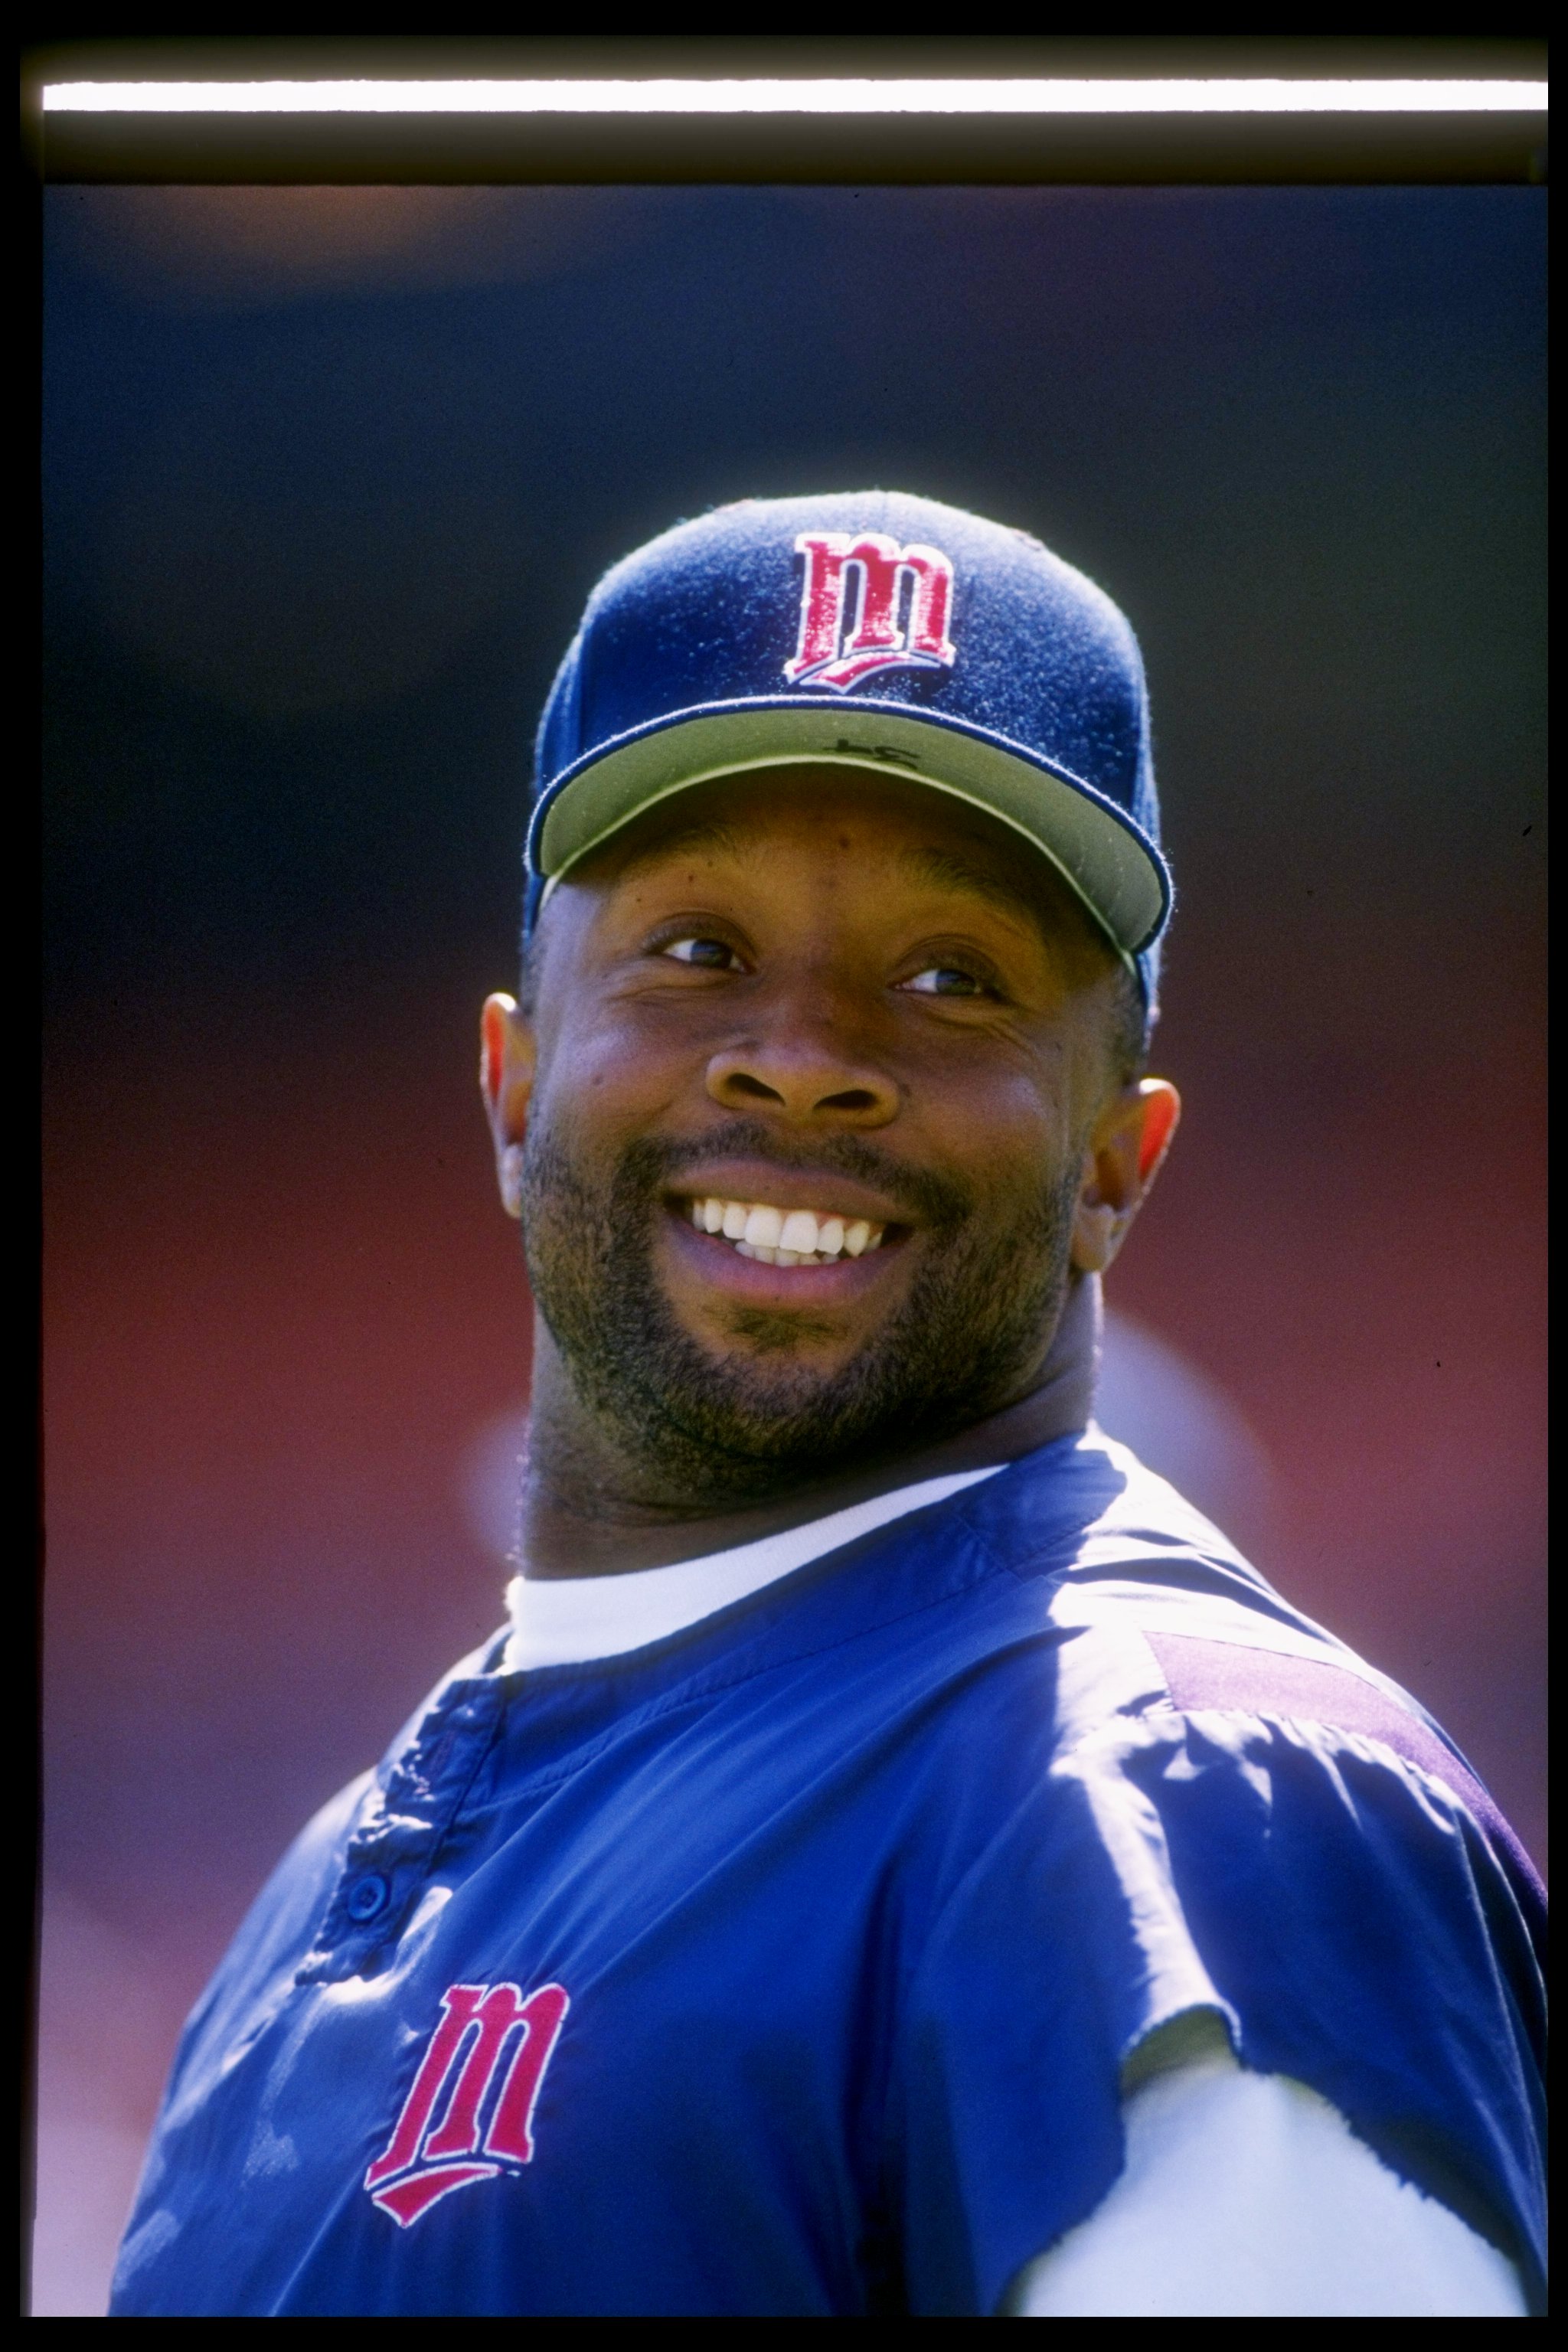 MLB Hall of Fame 2011: Kirby Puckett and the 10 Worst Selections